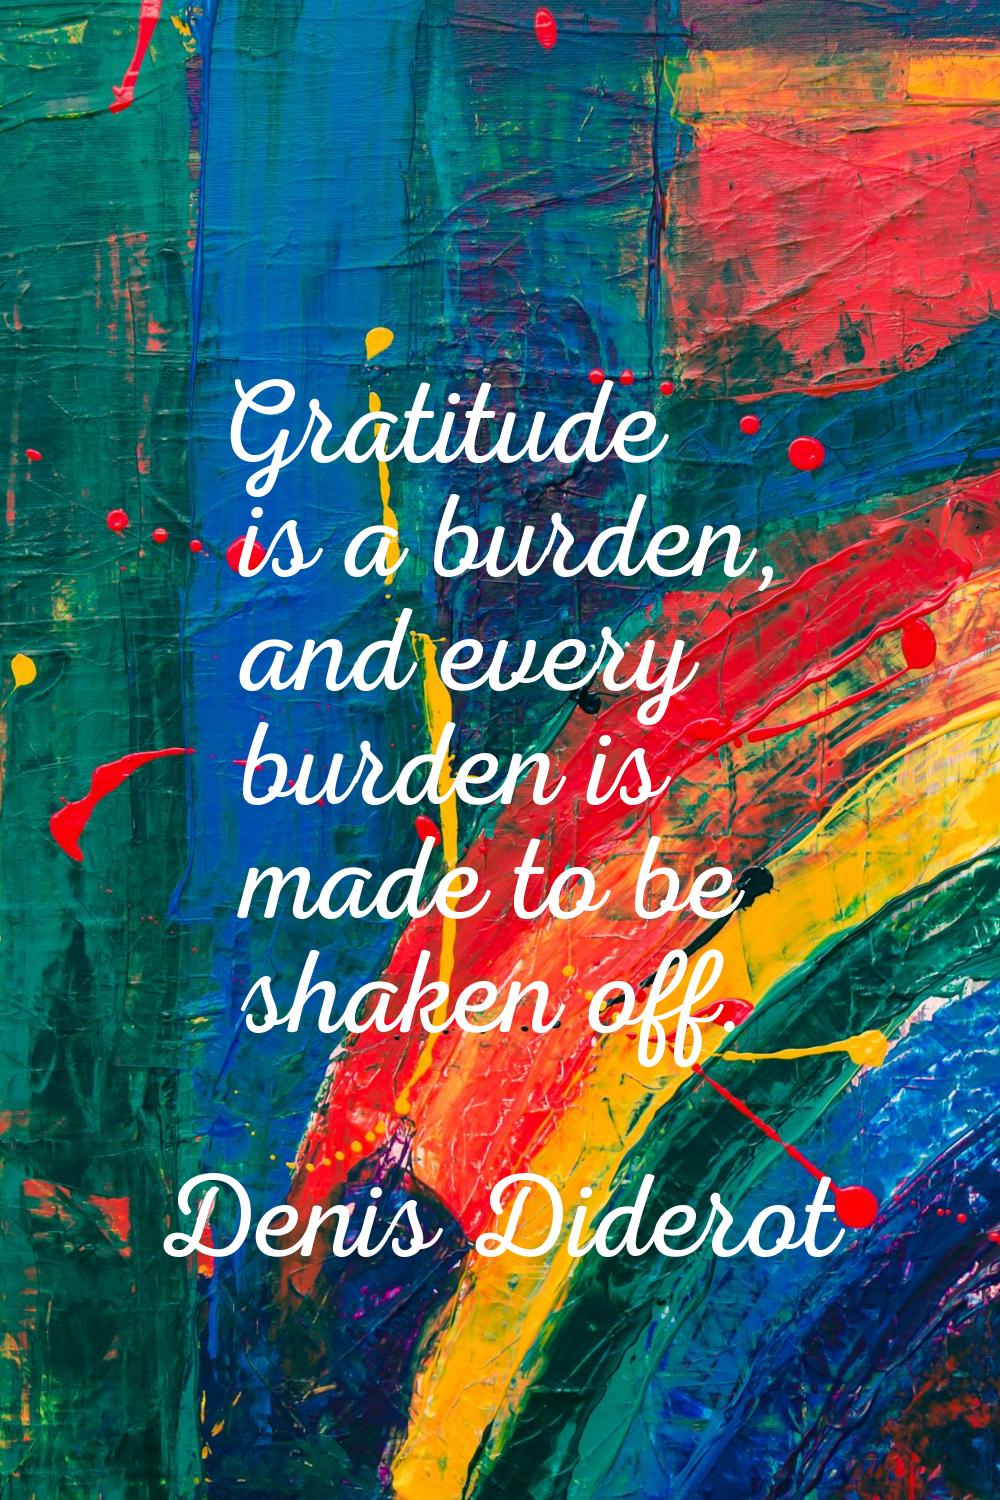 Gratitude is a burden, and every burden is made to be shaken off.